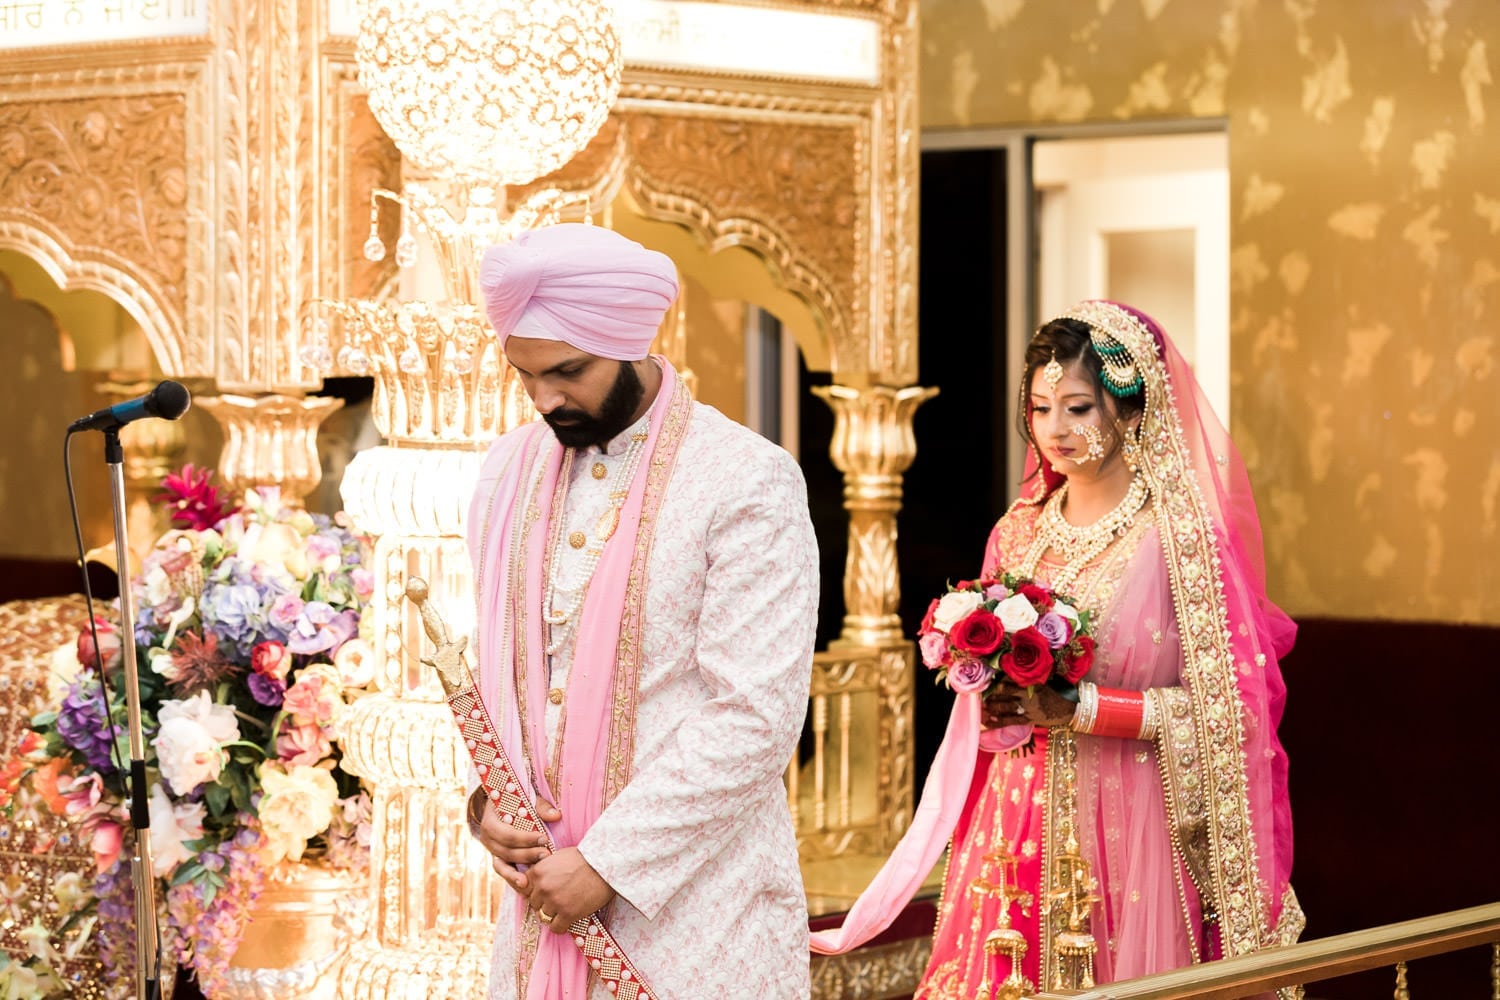 Indian bride and groom at the temple | Indian wedding photography Vancouver